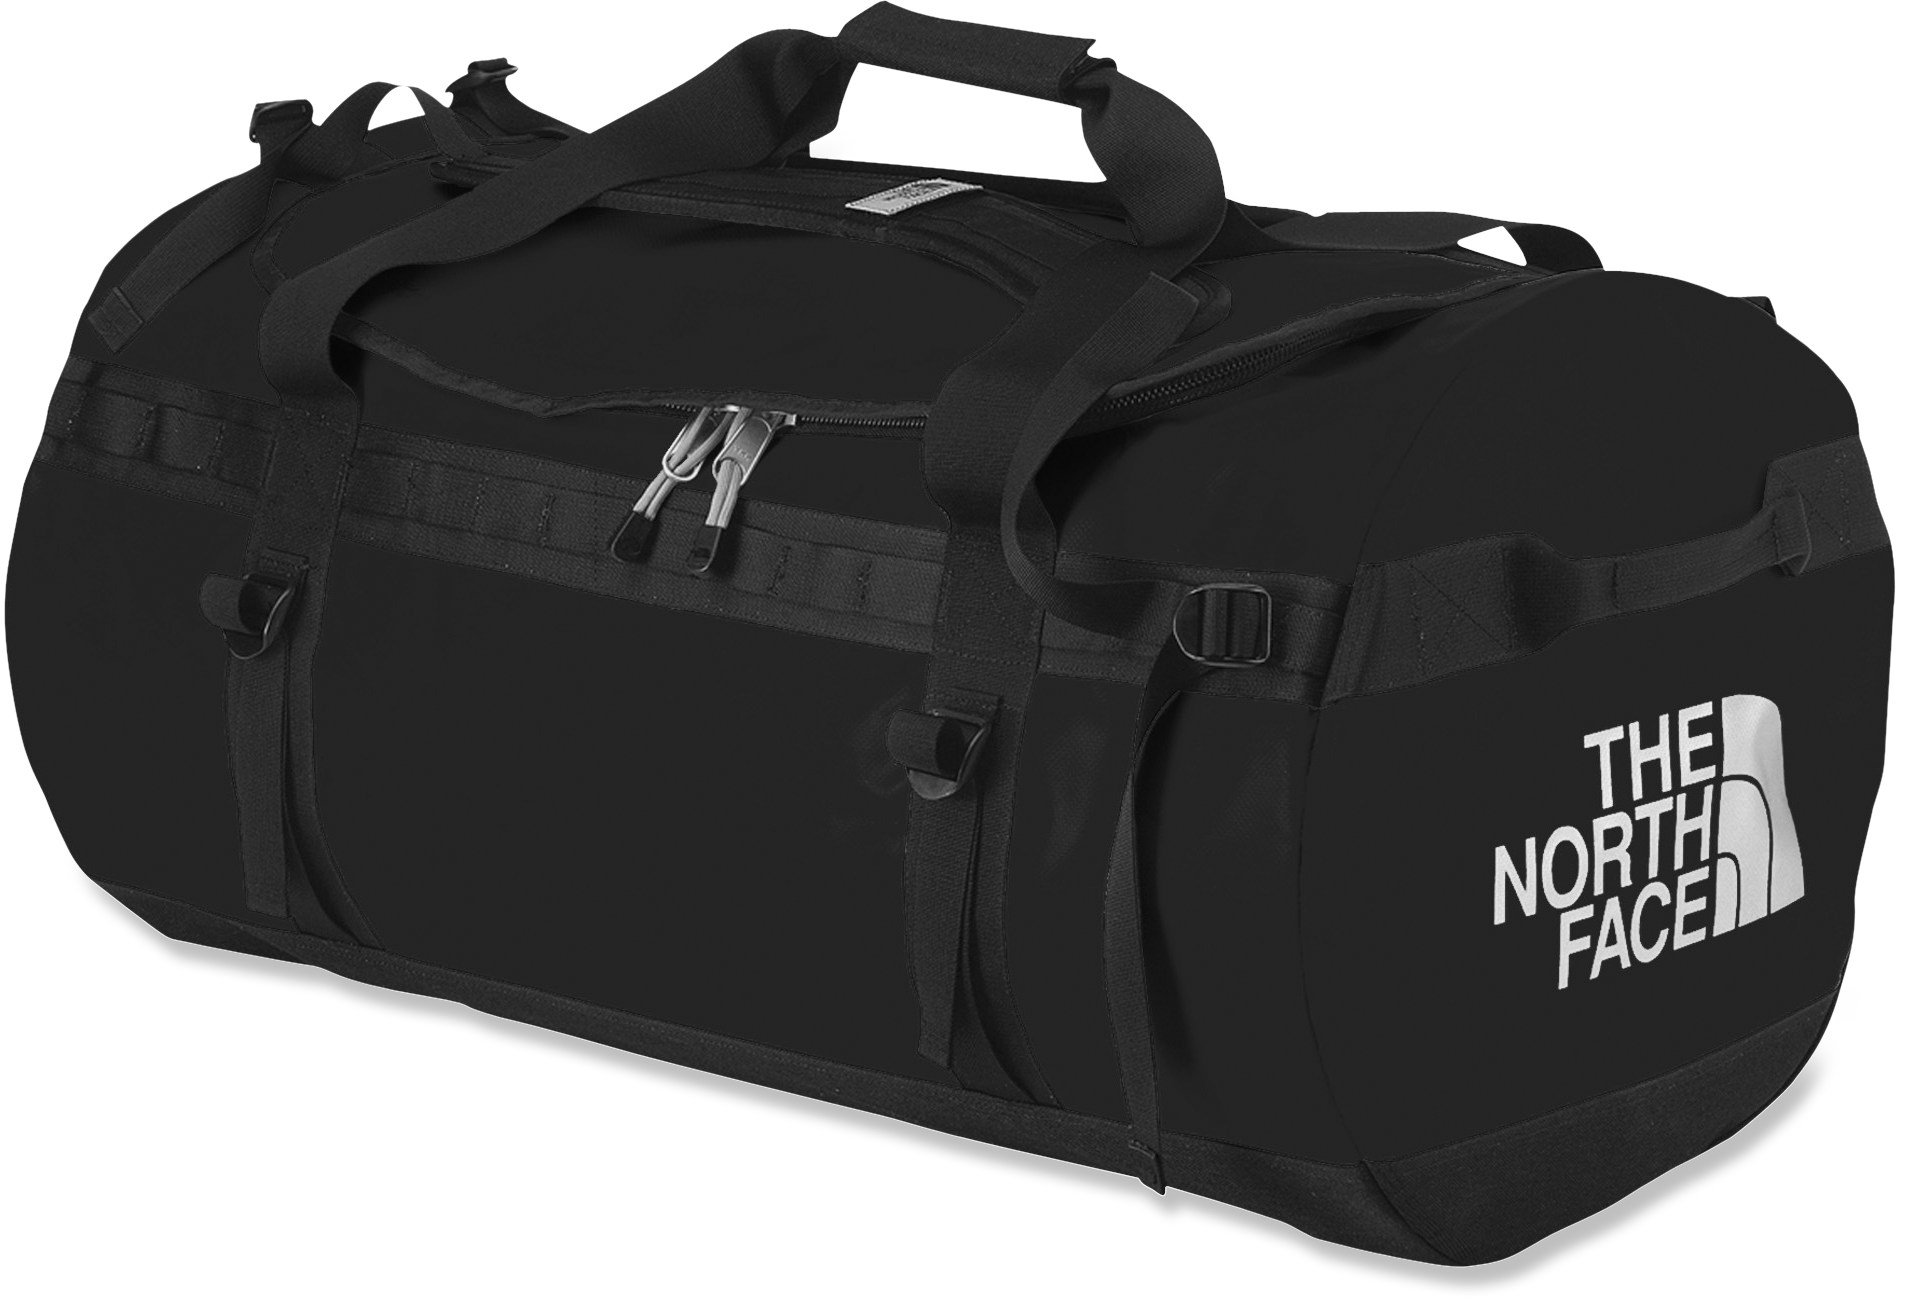 North Face Backpack Duffel. The North Face Base Camp Duffel, Tnf Black, Large.